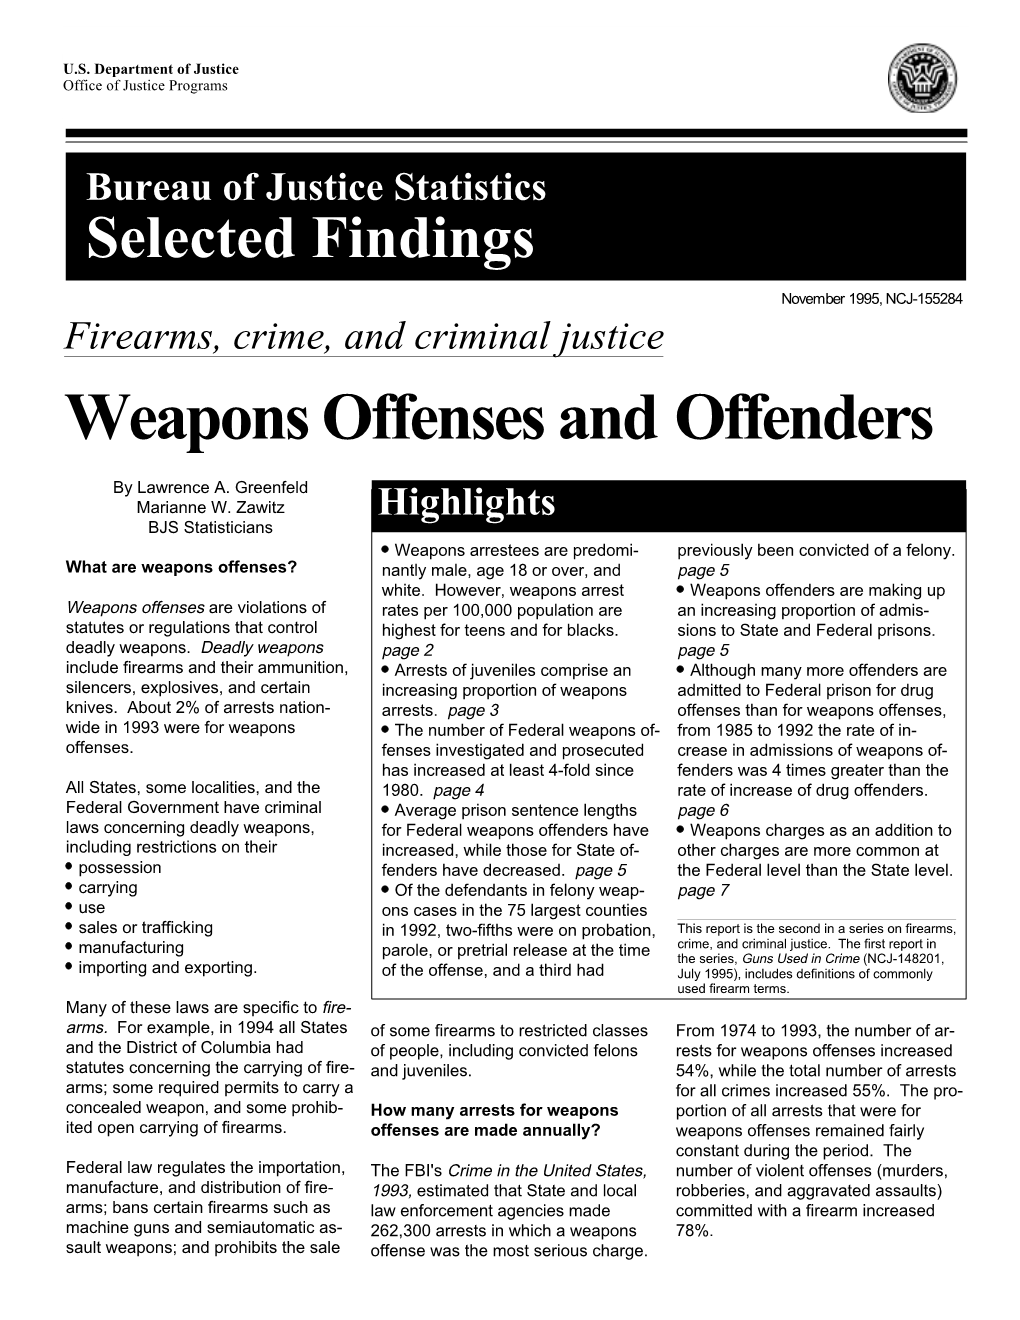 Weapons Offenses and Offenders